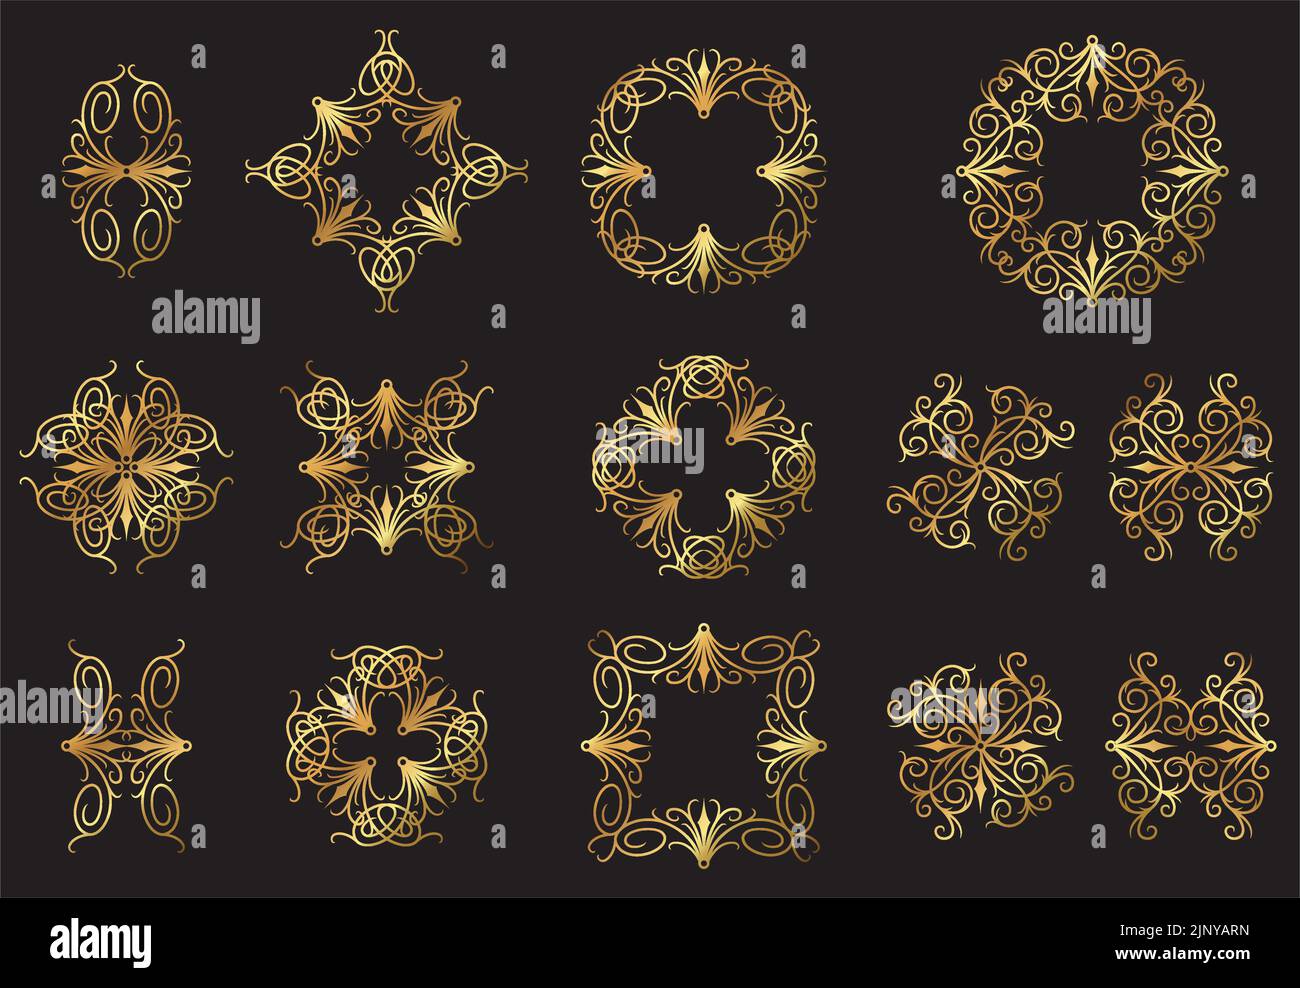 A set of vintage vector gold gothic floral decorative icons. Stock Vector